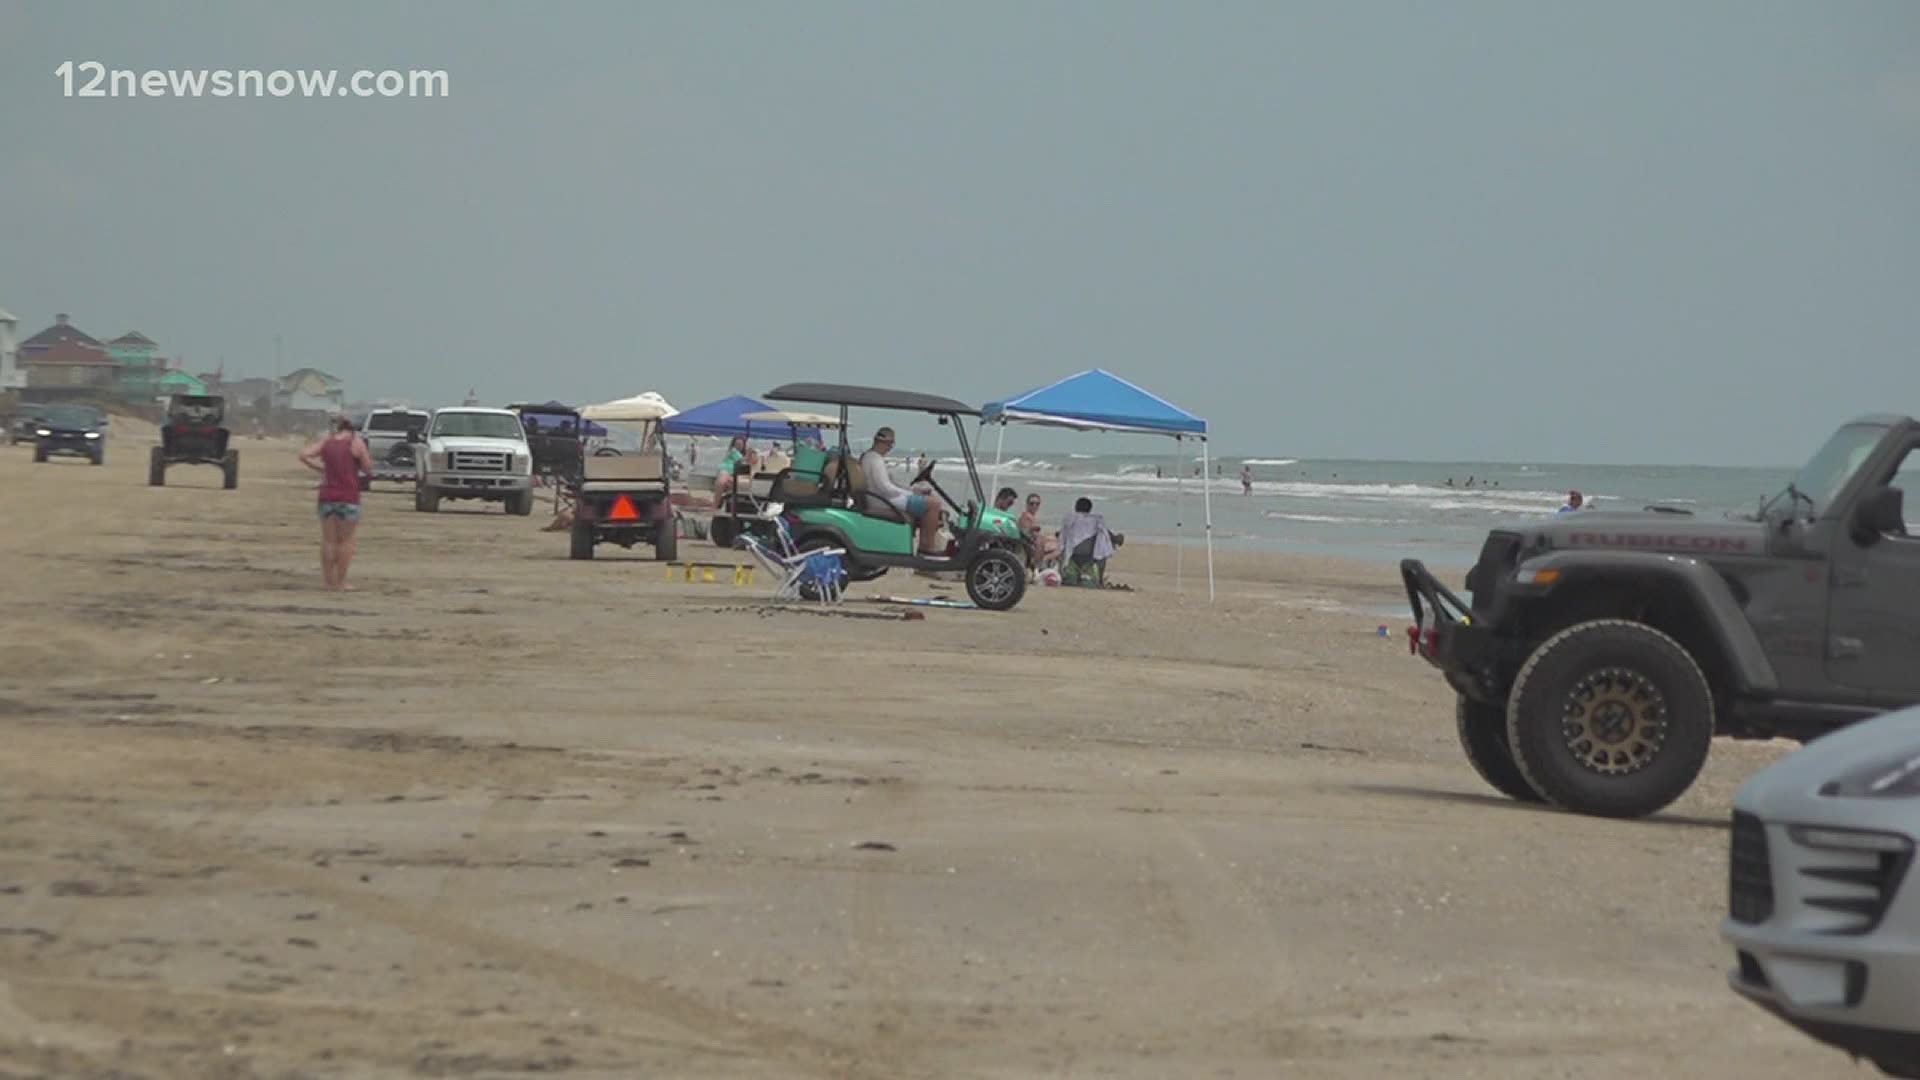 In an effort to keep COVID-19 from spreading, those on Crystal Beach say the the beach wasn't very crowded and left plenty of room to keep distance between families